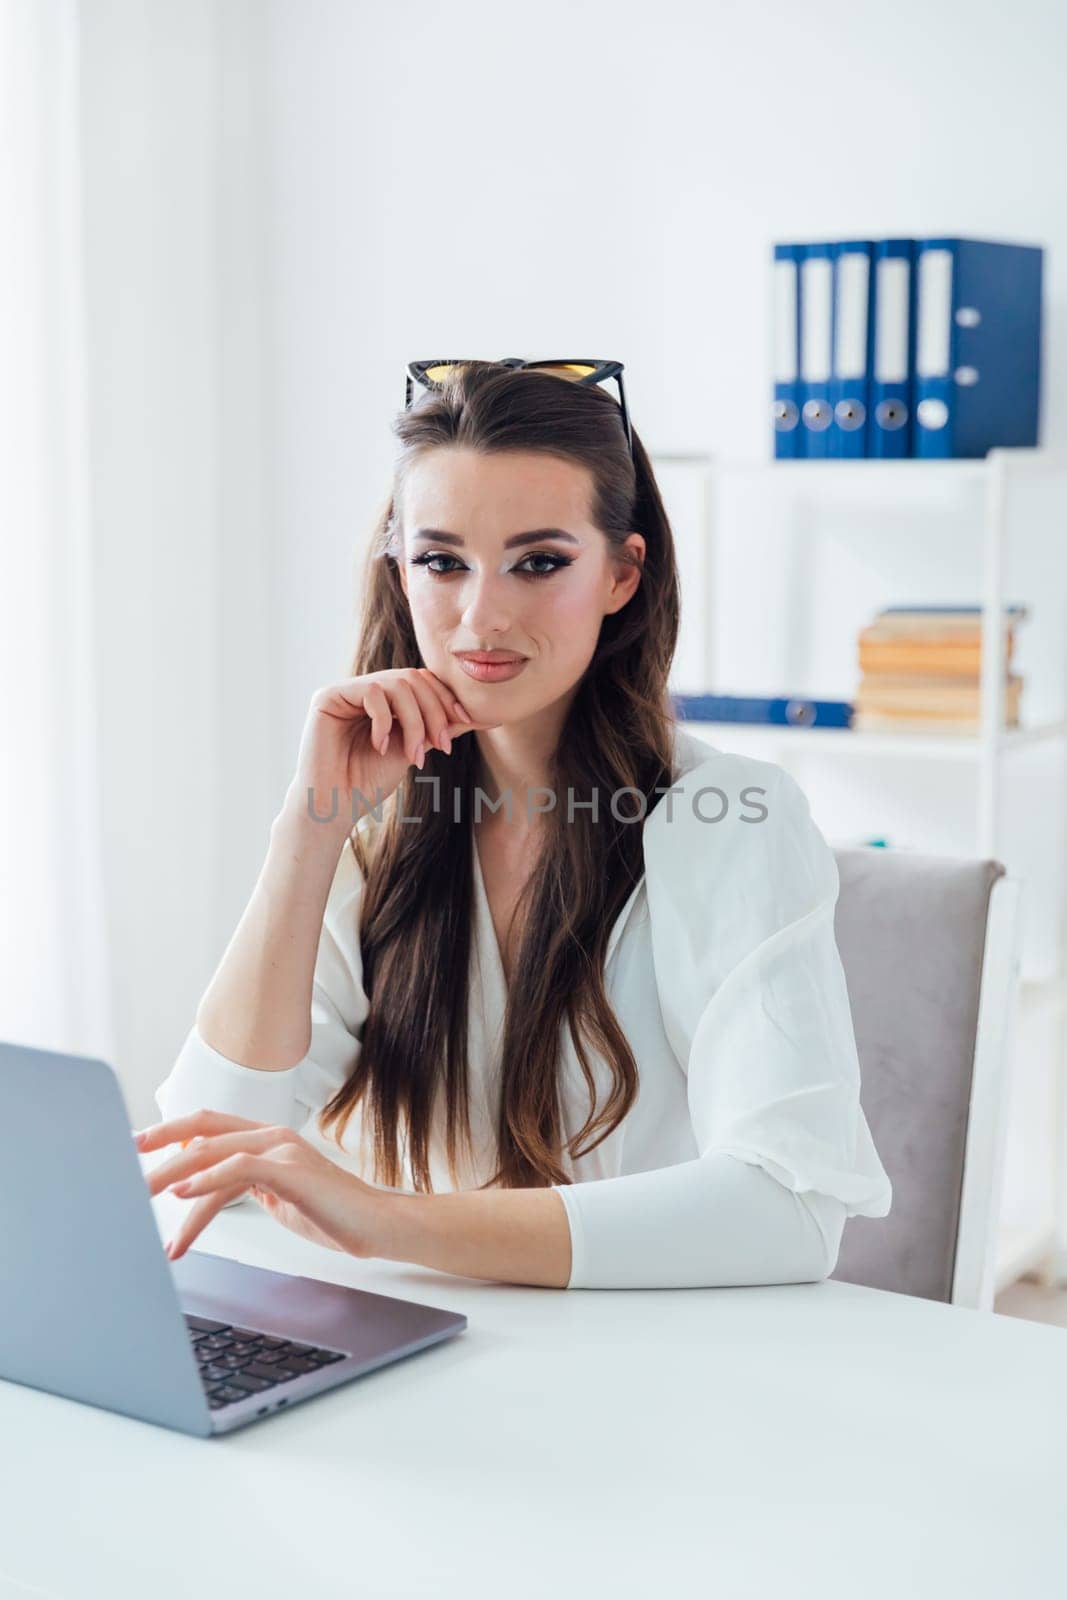 Business woman working on laptop in office finance business online